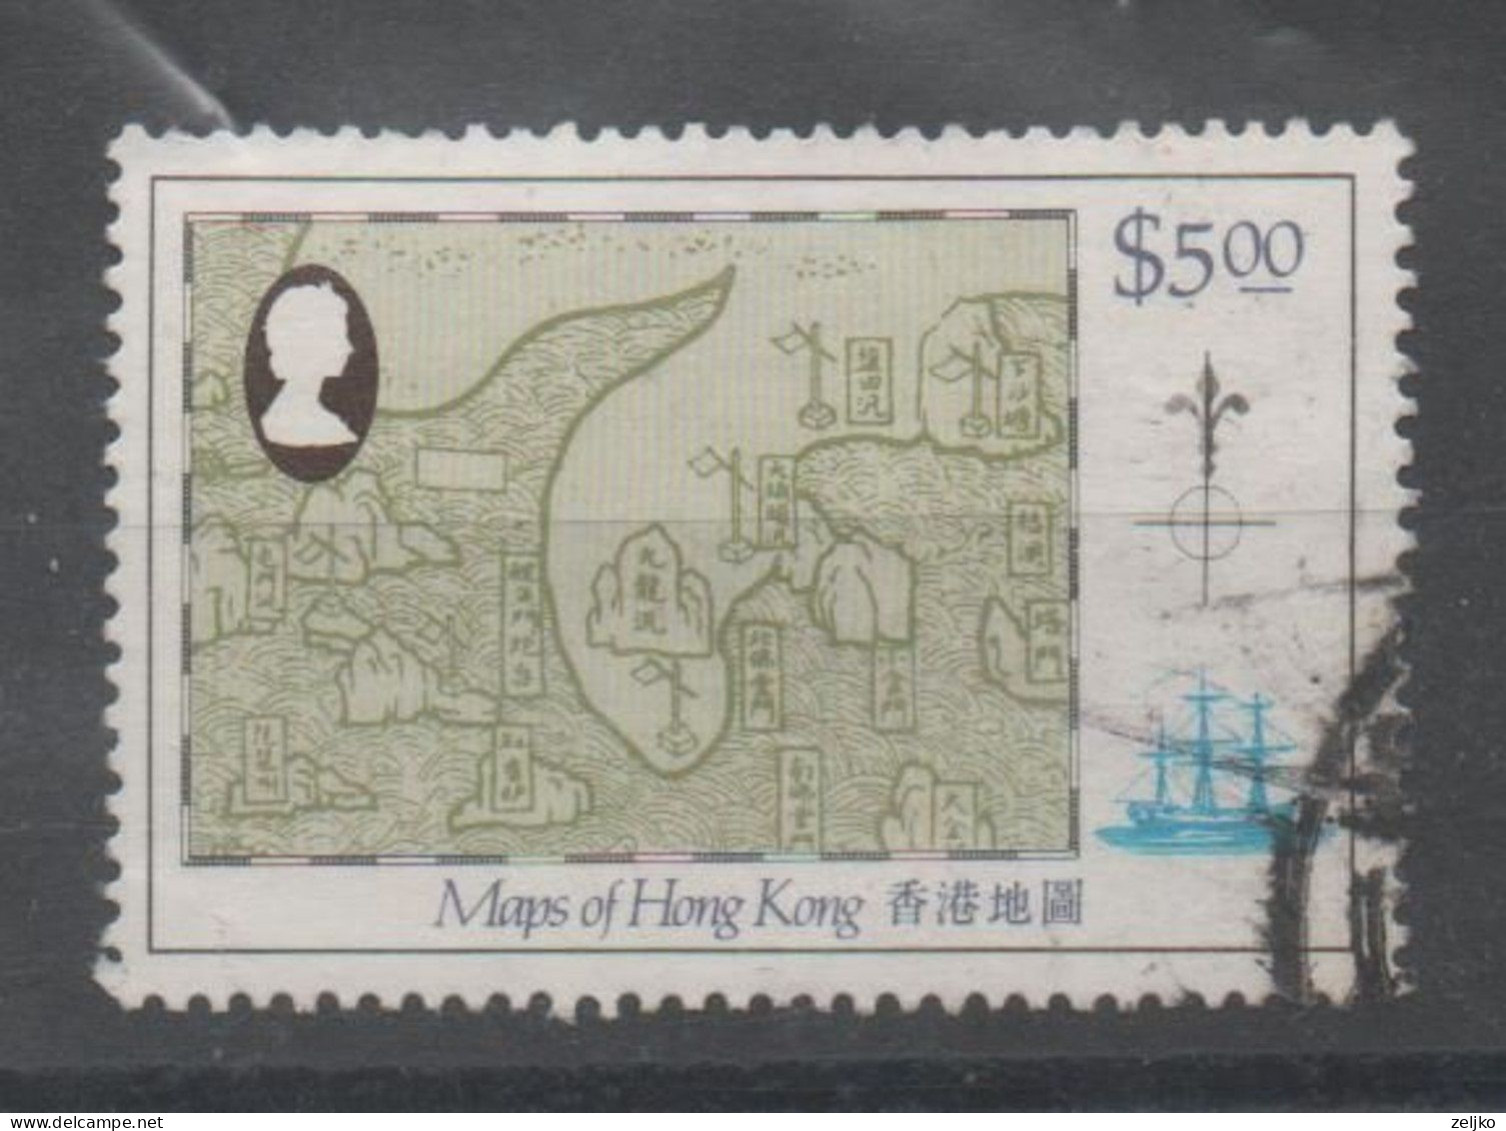 Hong Kong, Used, 1984, Michel 430 - Used Stamps